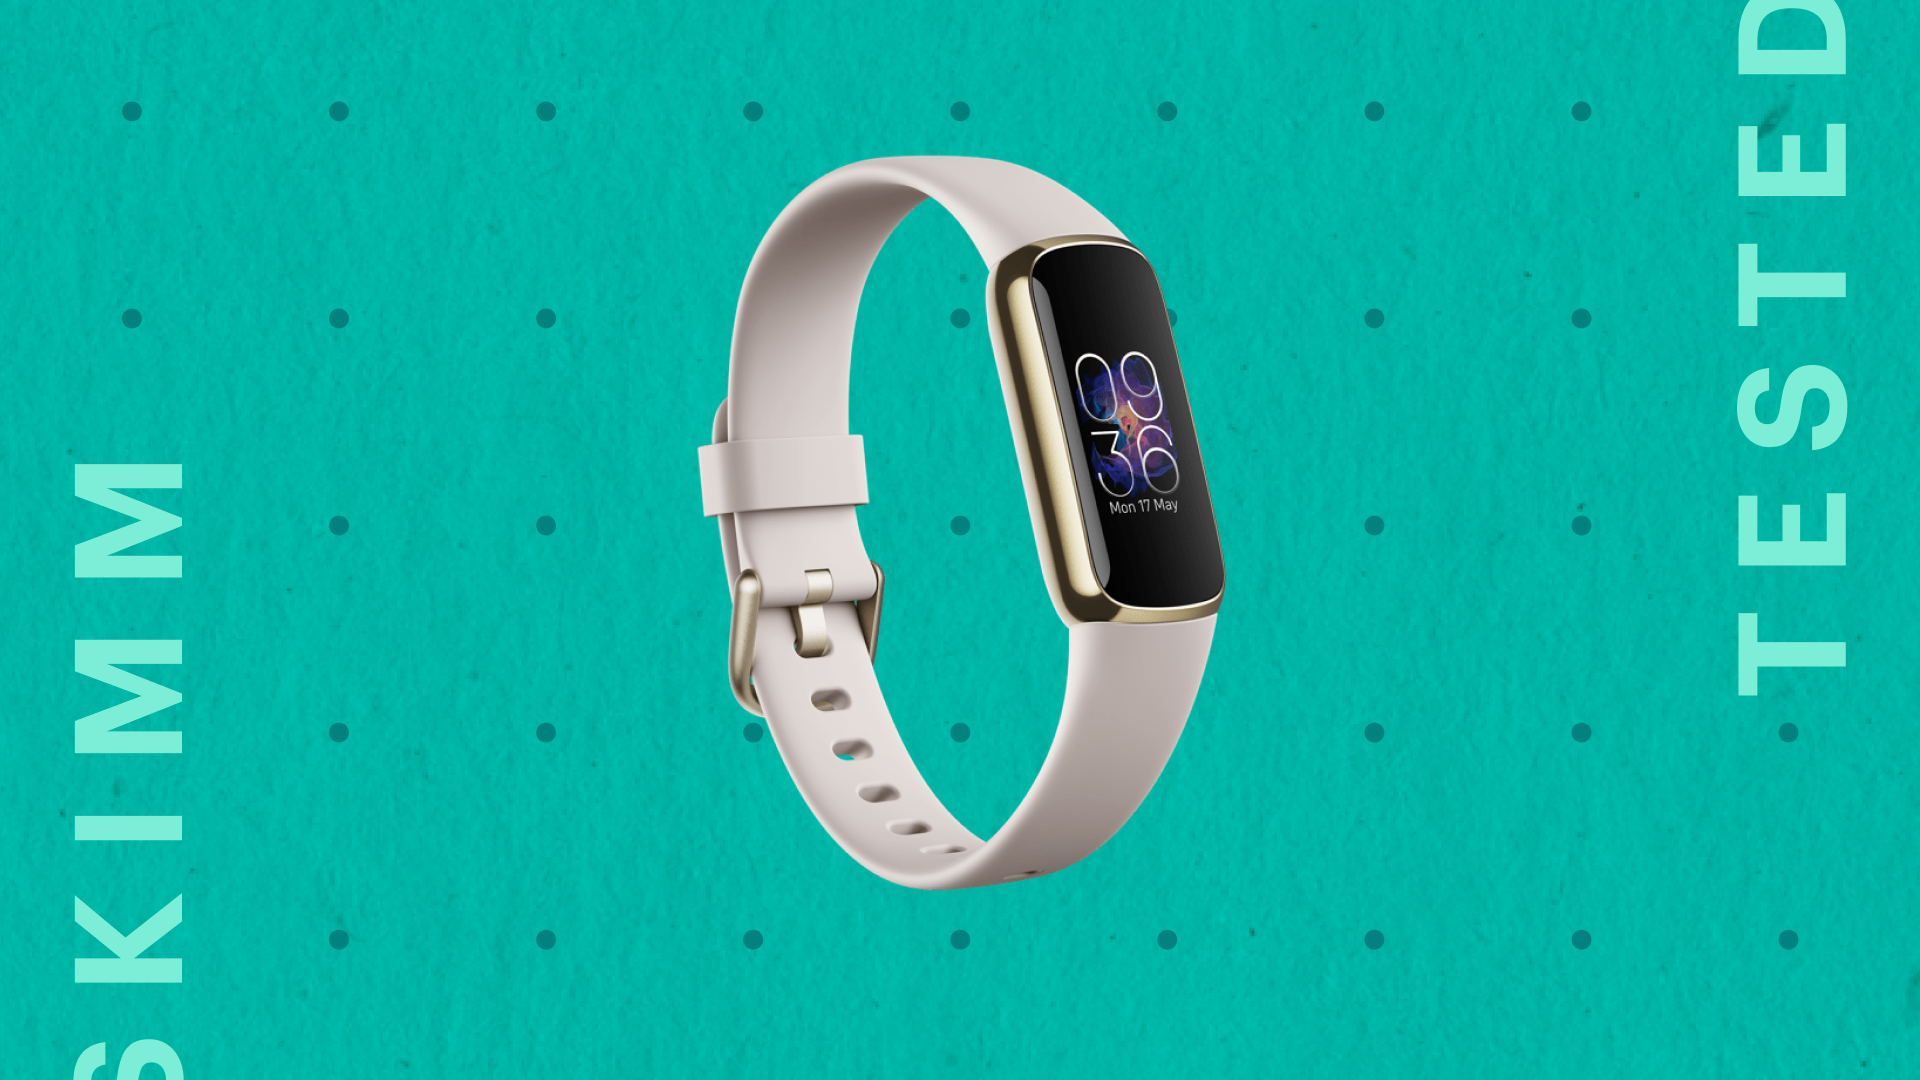 Modsætte sig Kritisk Ulydighed Why the FitBit Luxe Is the Fitness Tracker You Need | theSkimm